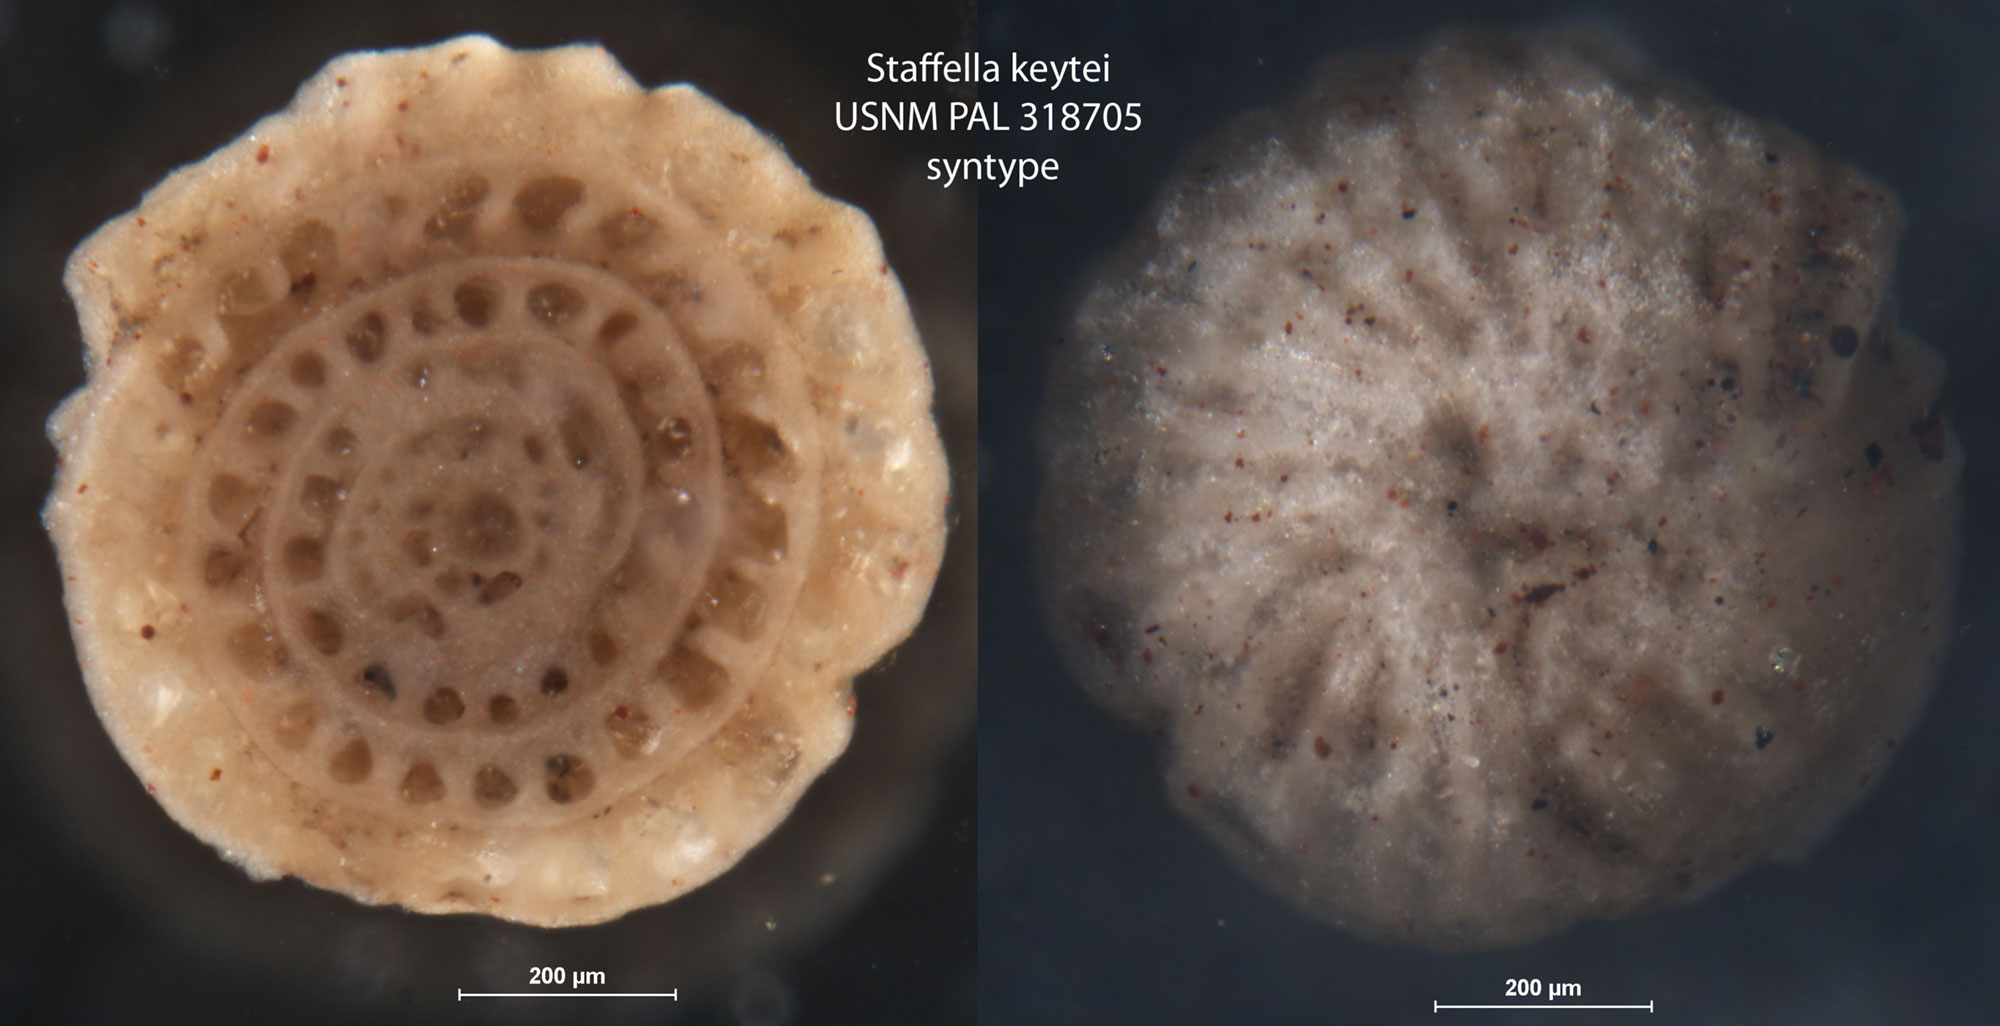 2-panel image showing photos of fusilinids. Panel 1: Fusilinid cut in half to show internal structure. The shell shows a spiraling structure with chambers. Panel 2: Outside of a fusilinid. The shell is off-white with a faint pattern of radiating lines.